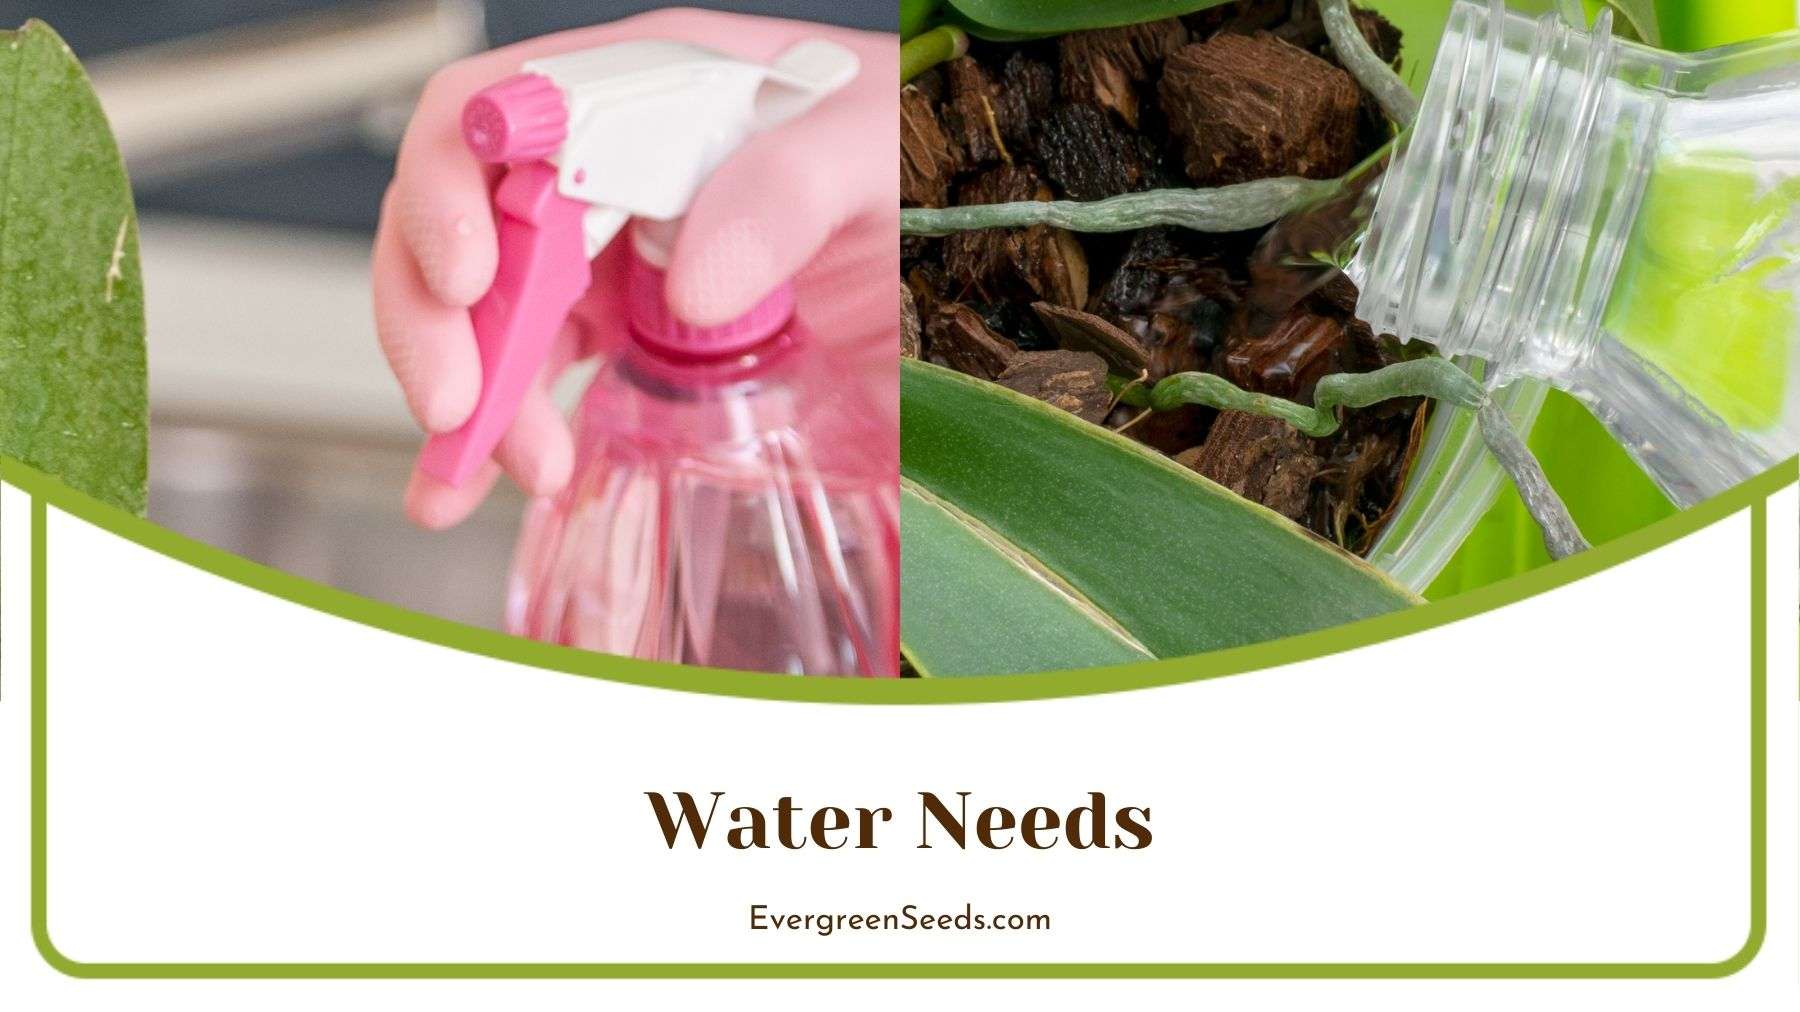 Water Needs for Orchids